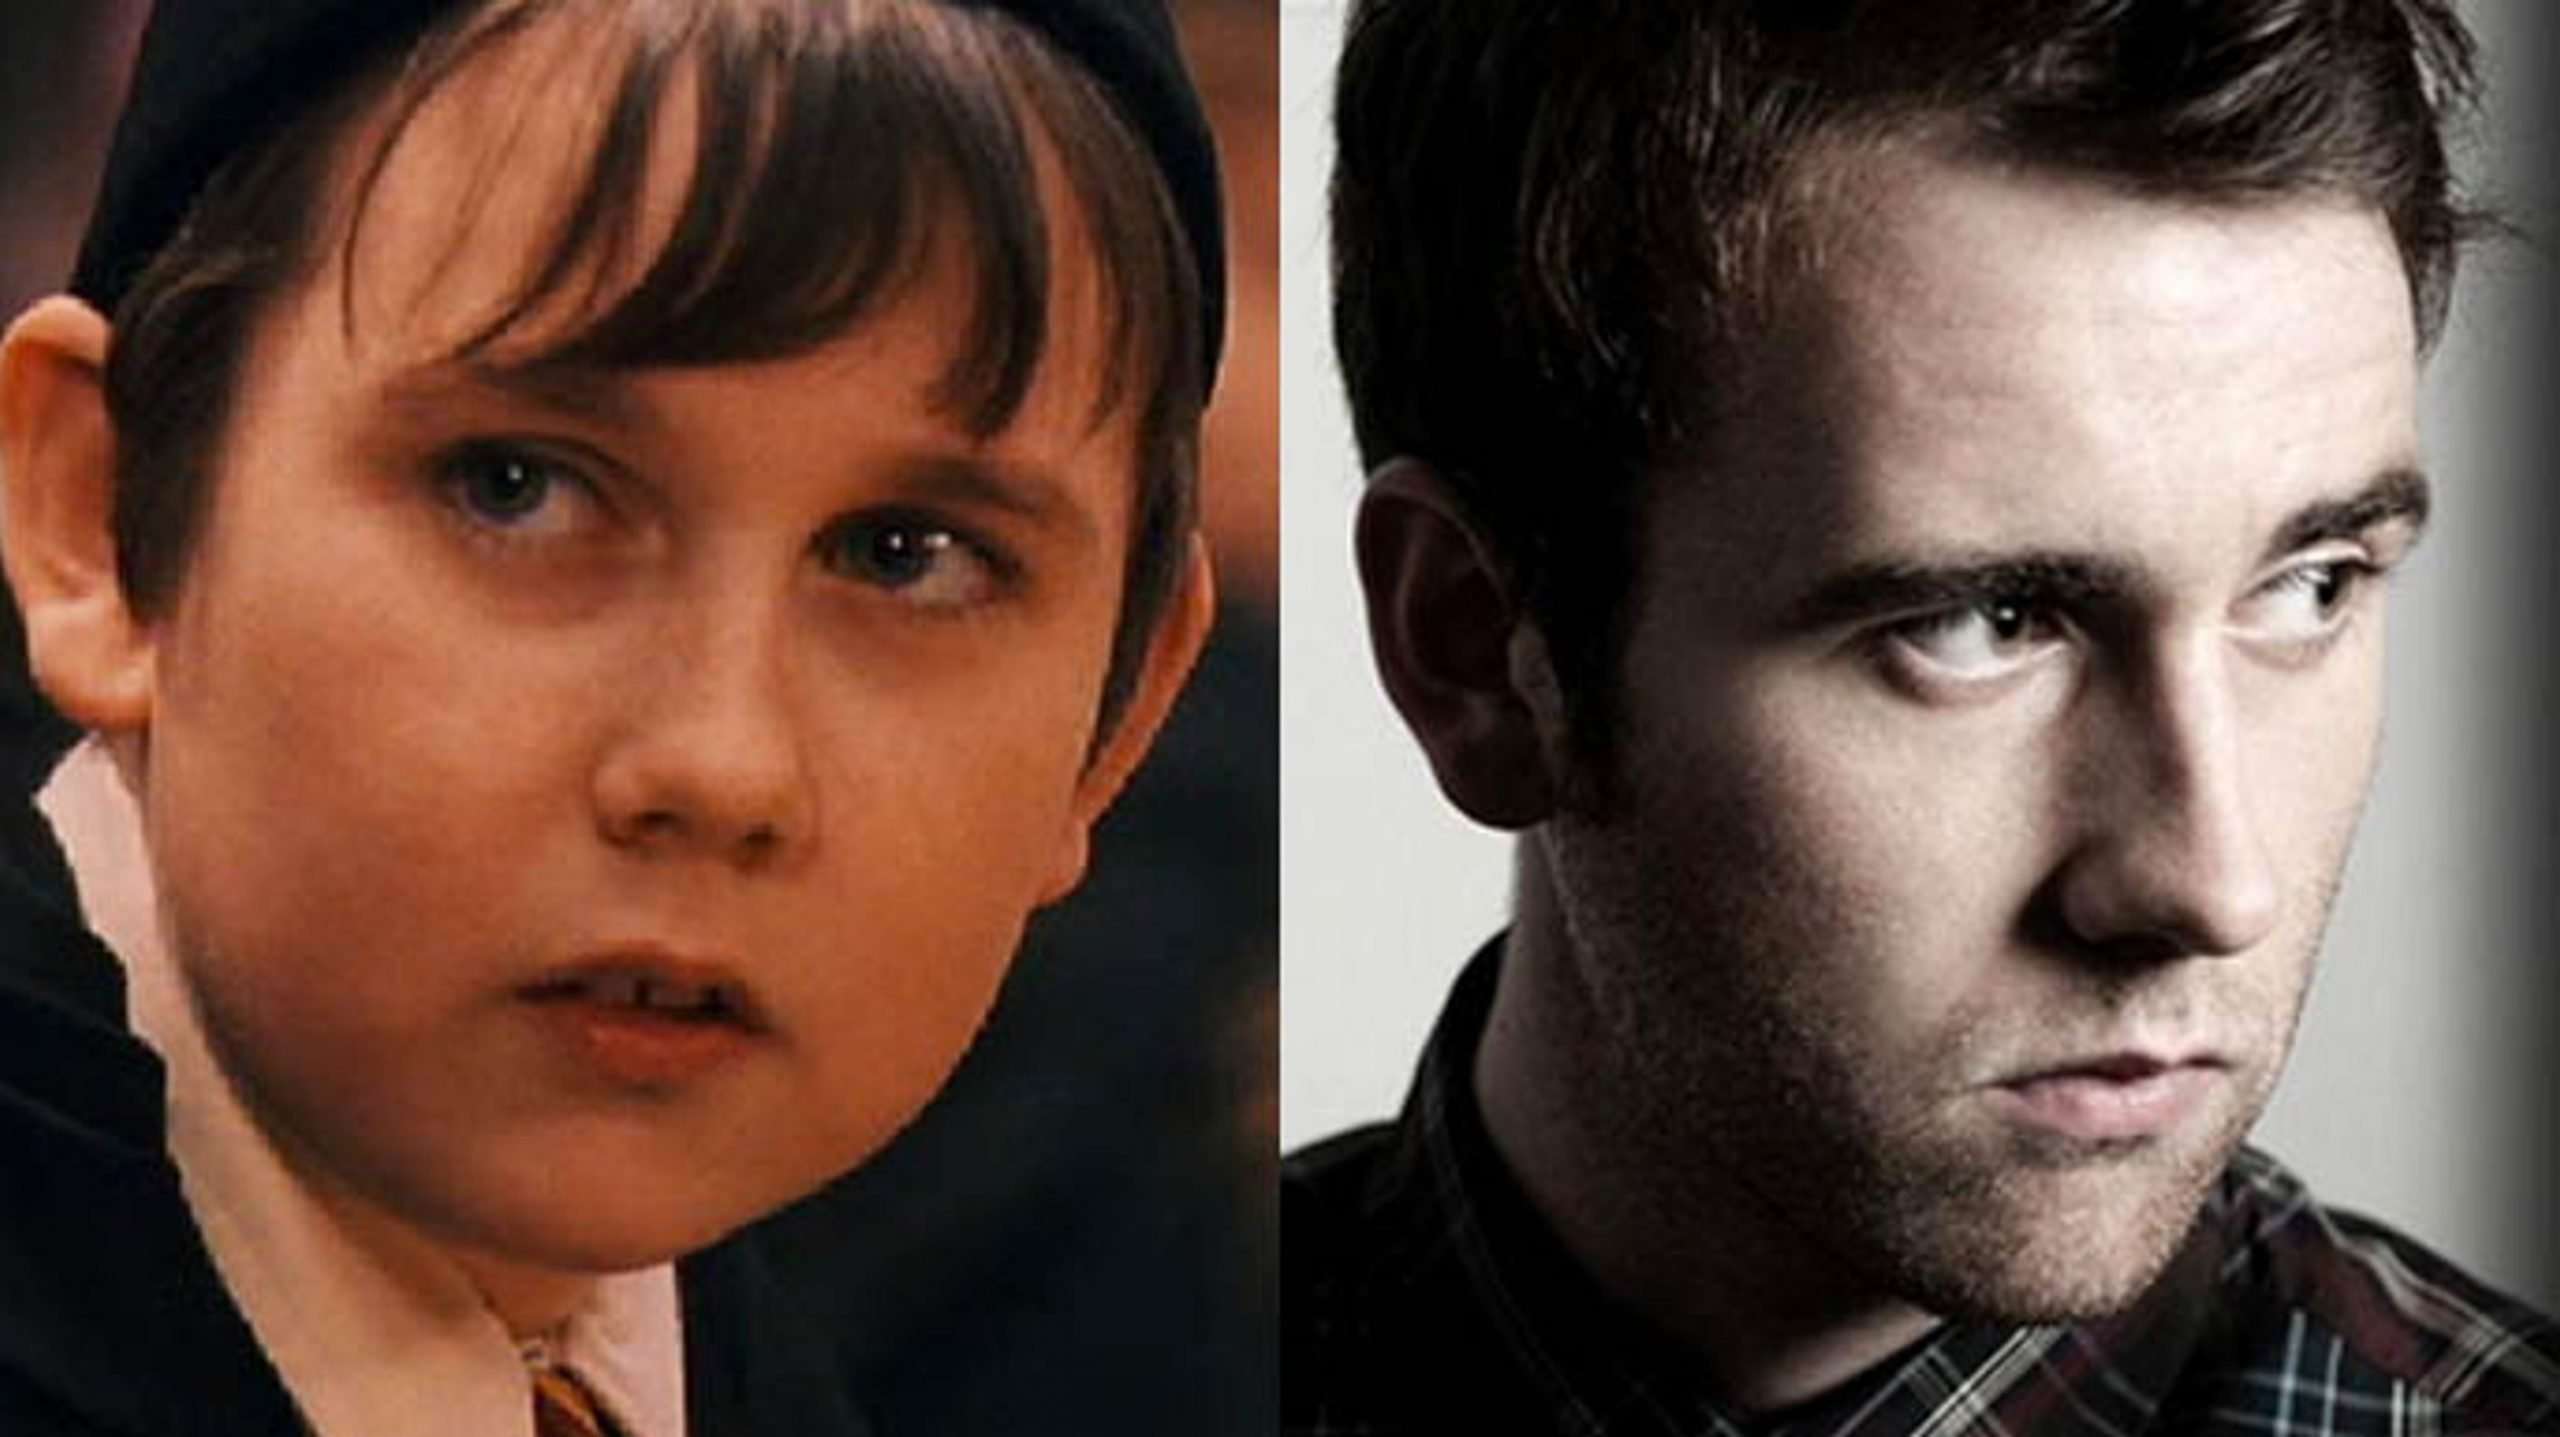 What Do The Boys Of Harry Potter Look Like Now?